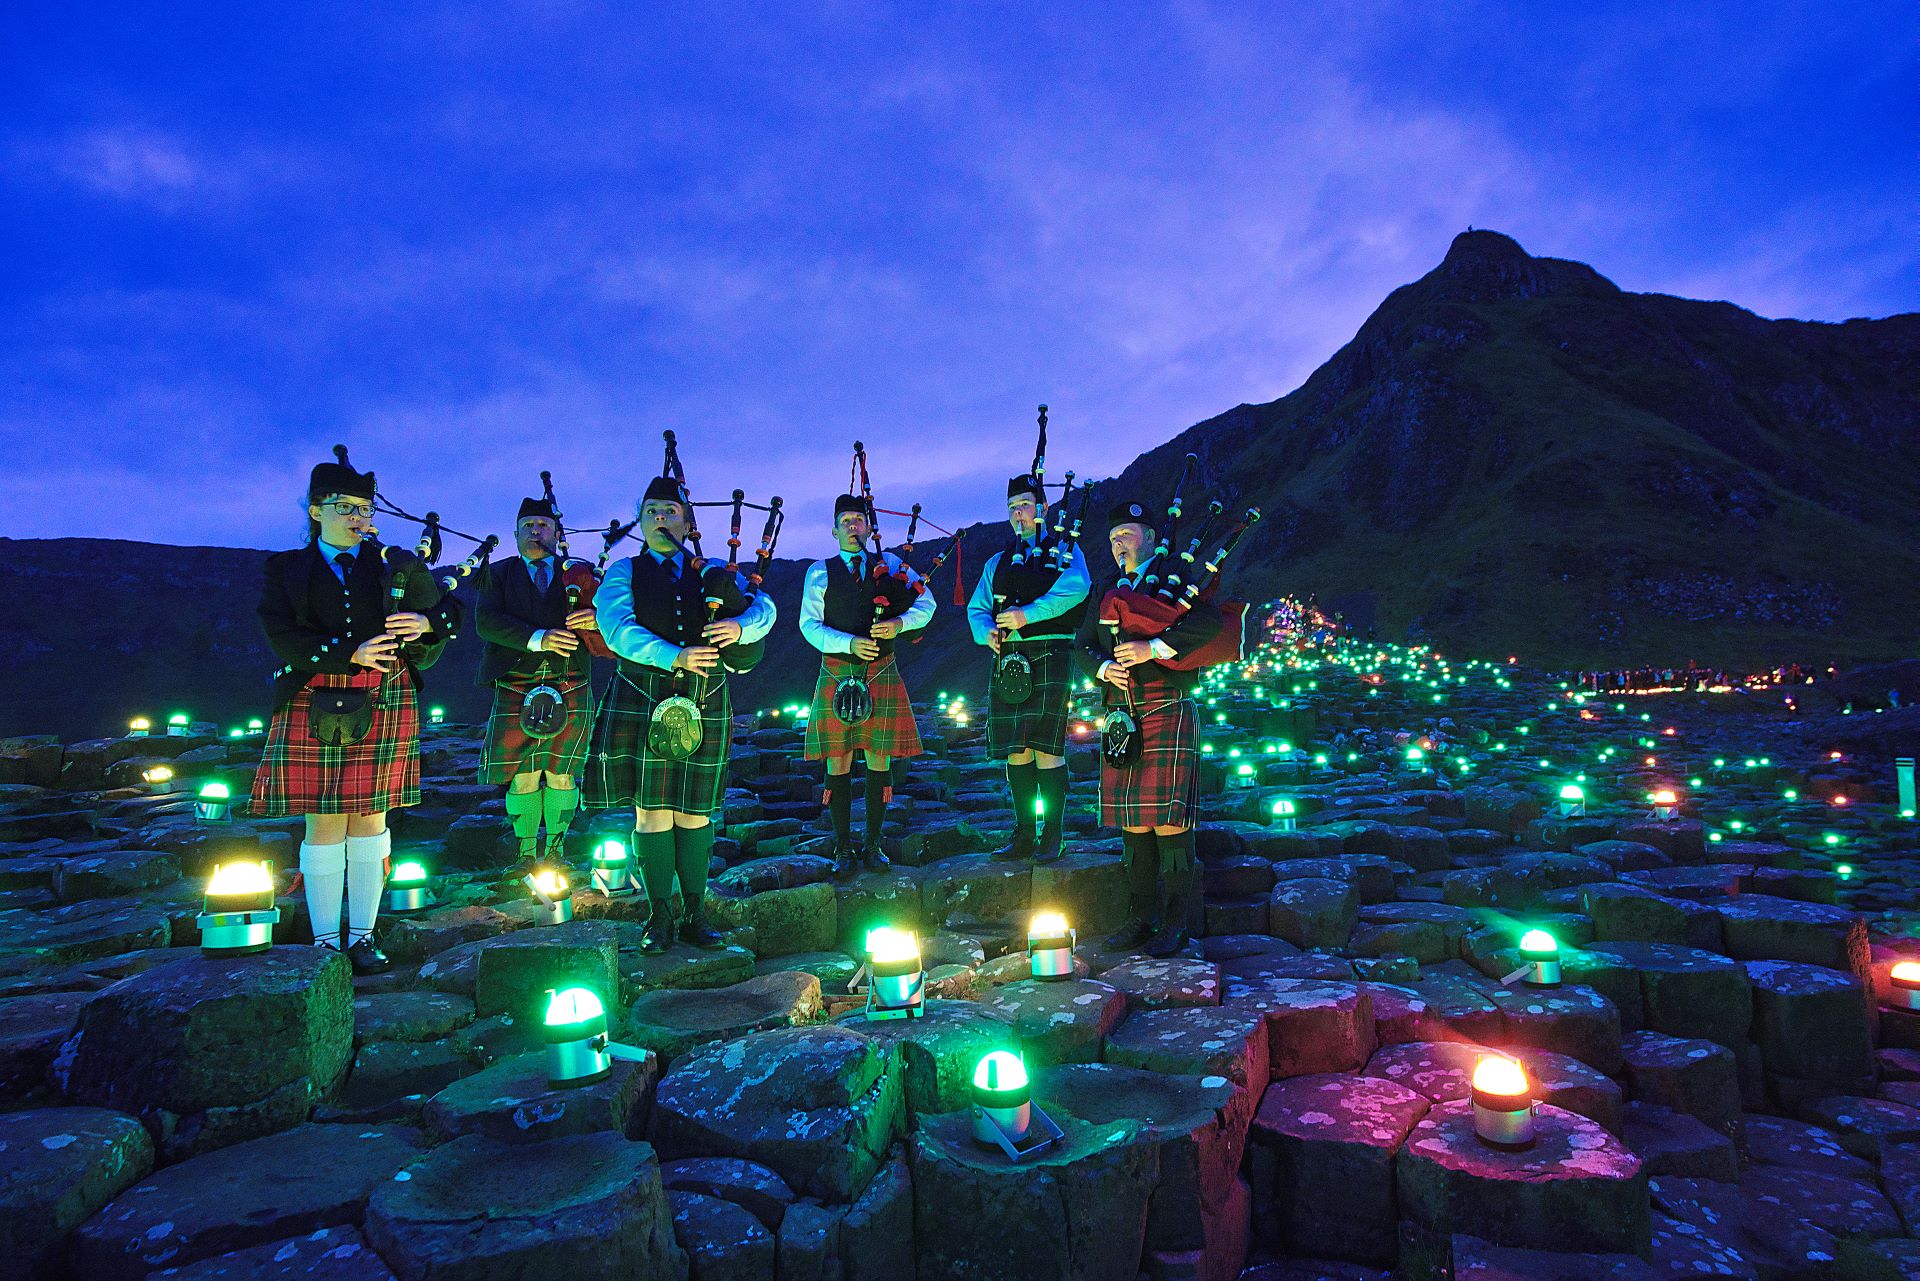 Six Northern Irish bagpipers play amongst low lights on the ground at Gian's Causeway